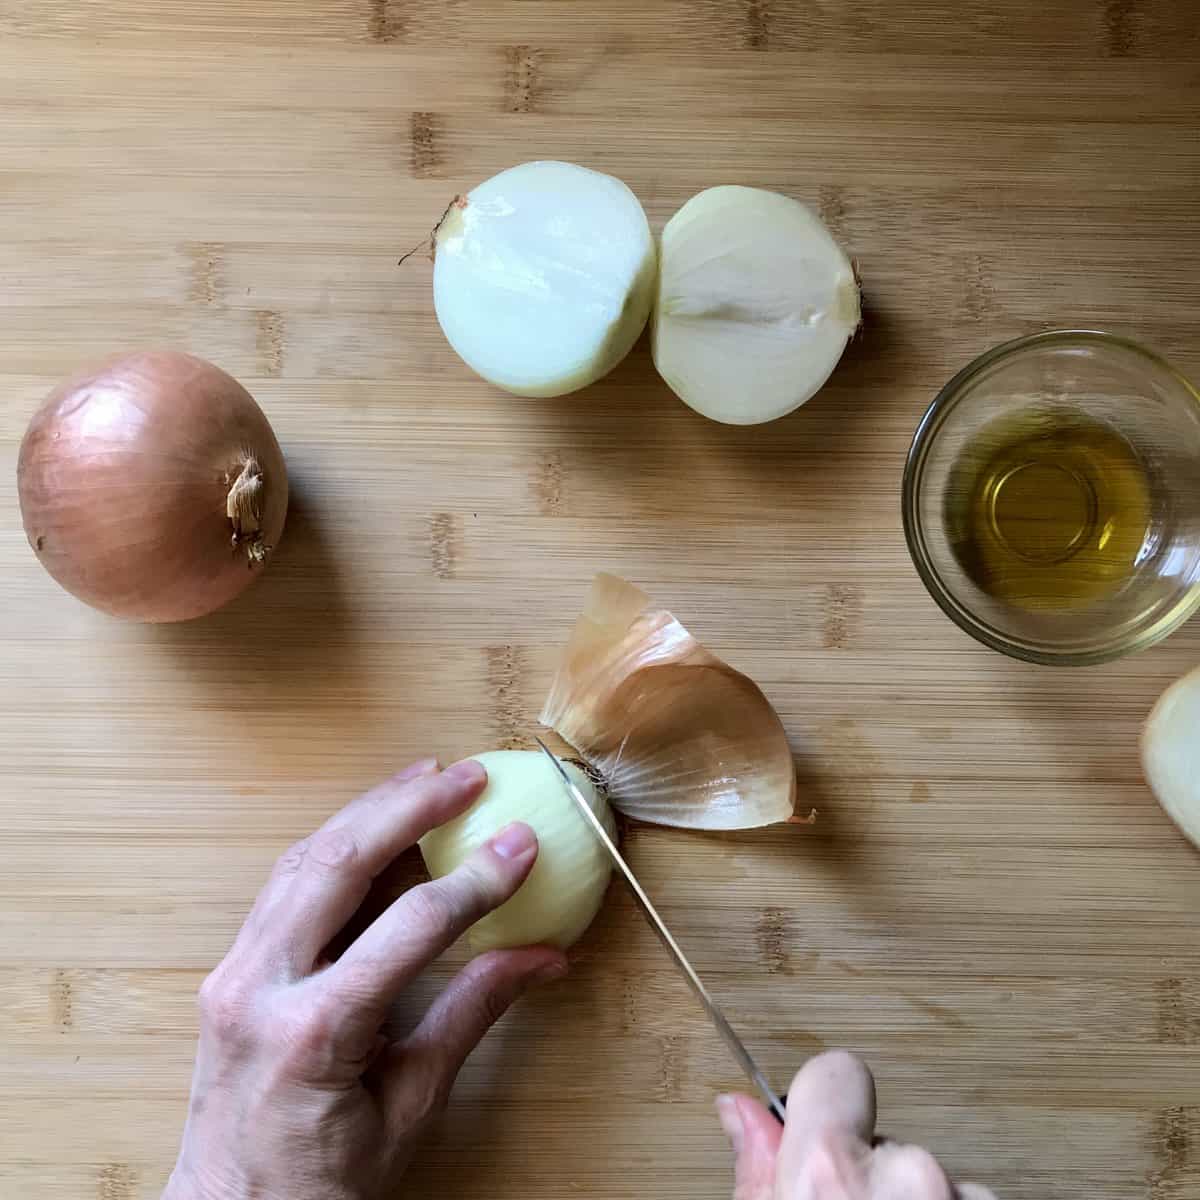 The root of the onion being sliced off.